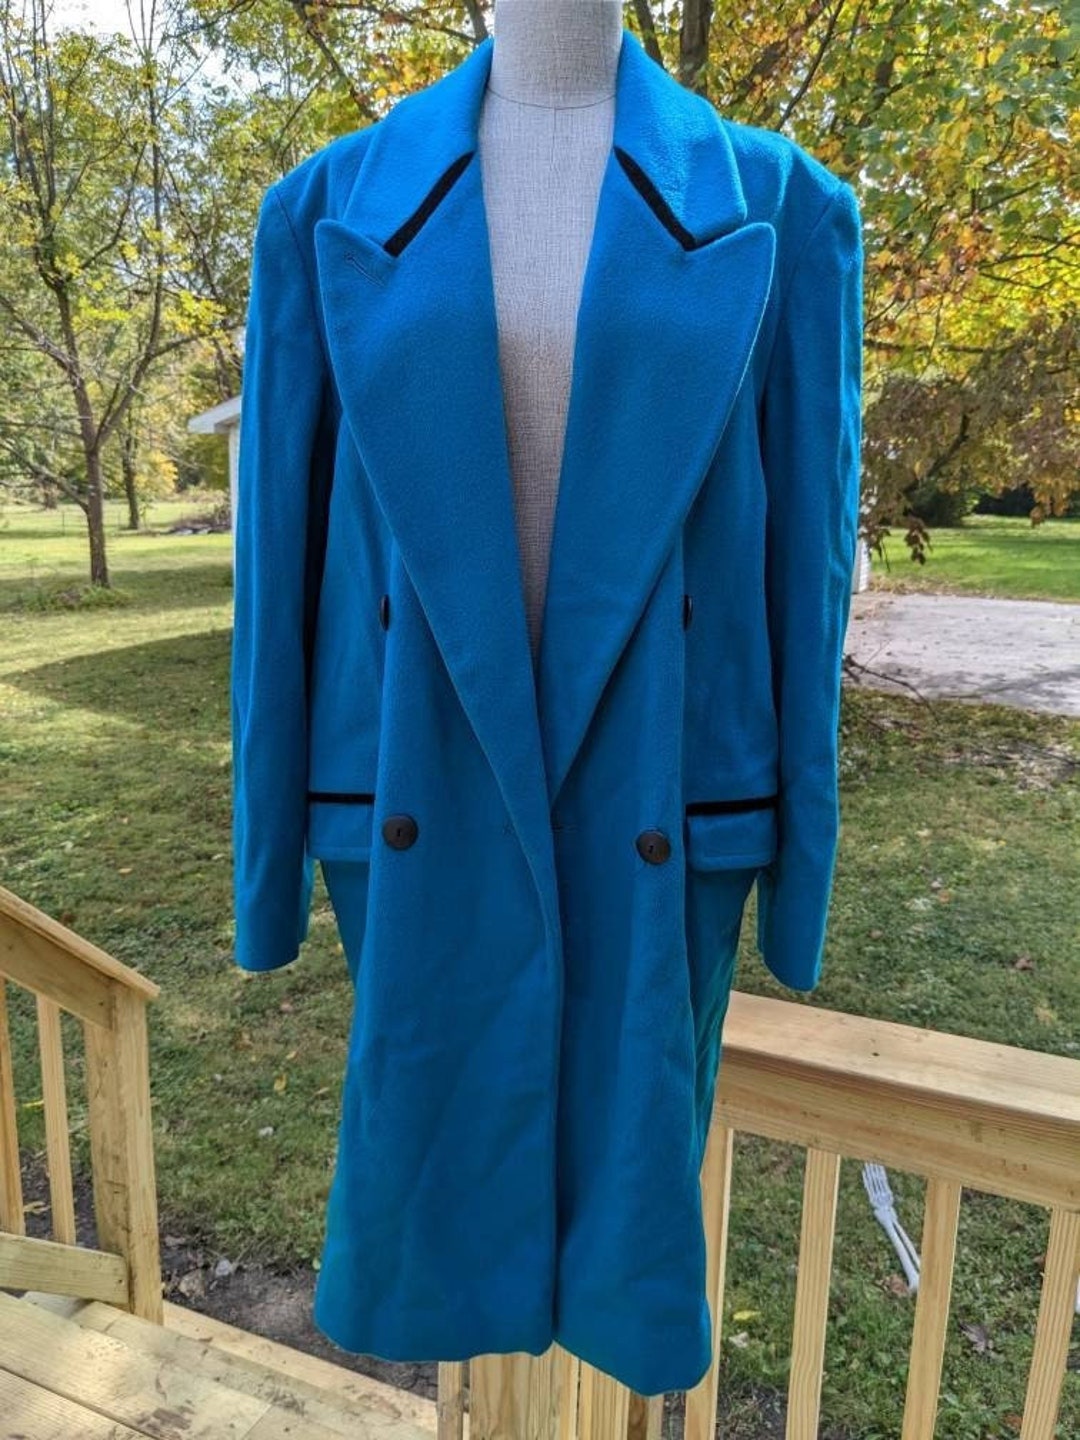 90s Teal Double Breasted Wool Coat by Phillip Courtney - Etsy